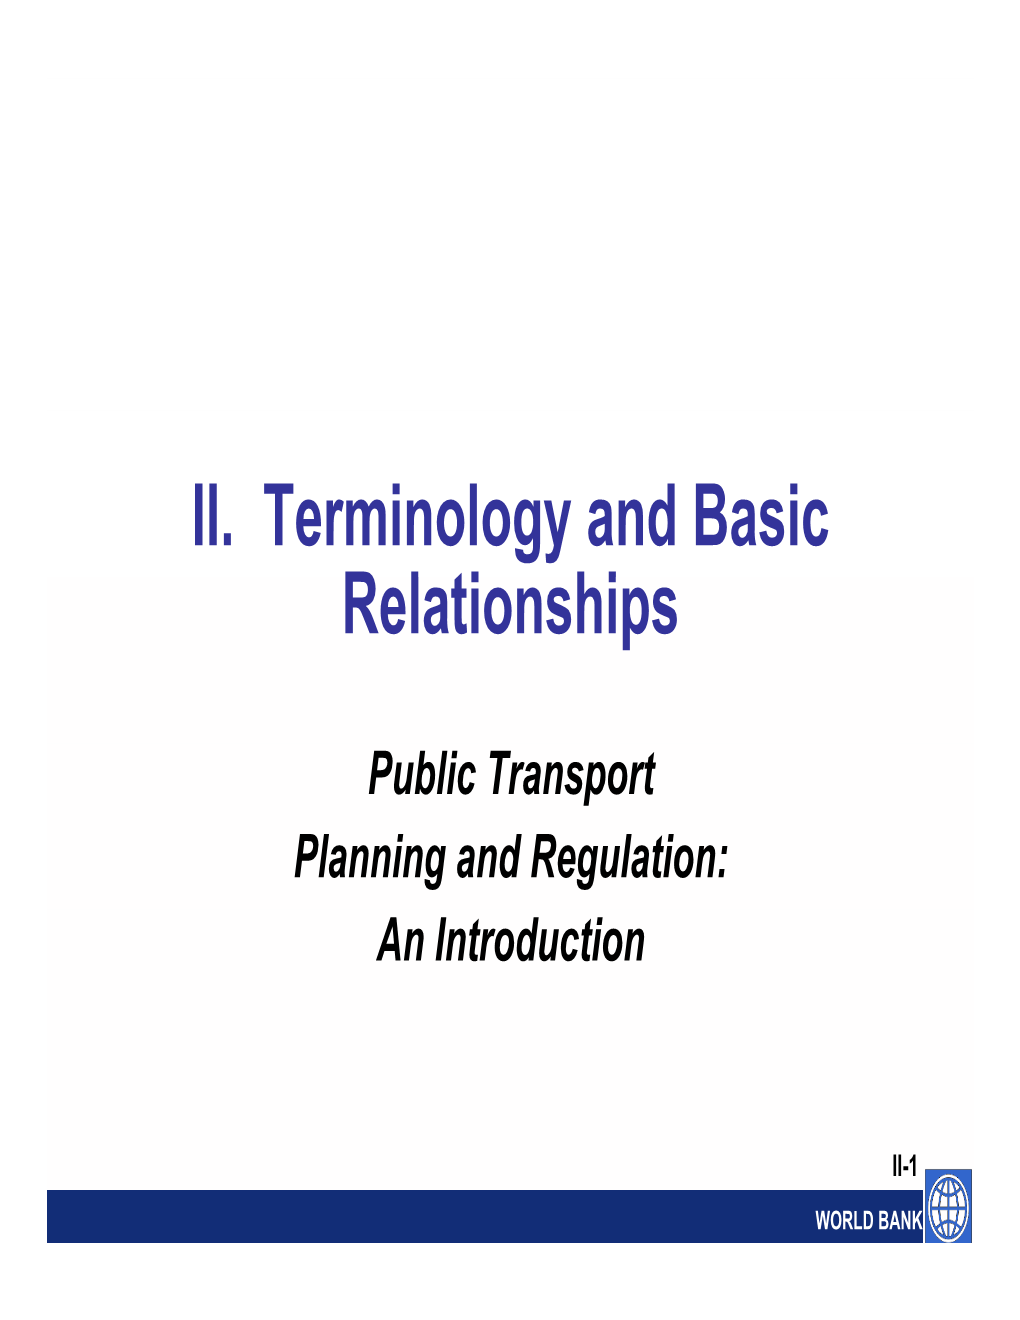 Terminology and Basic Relationships